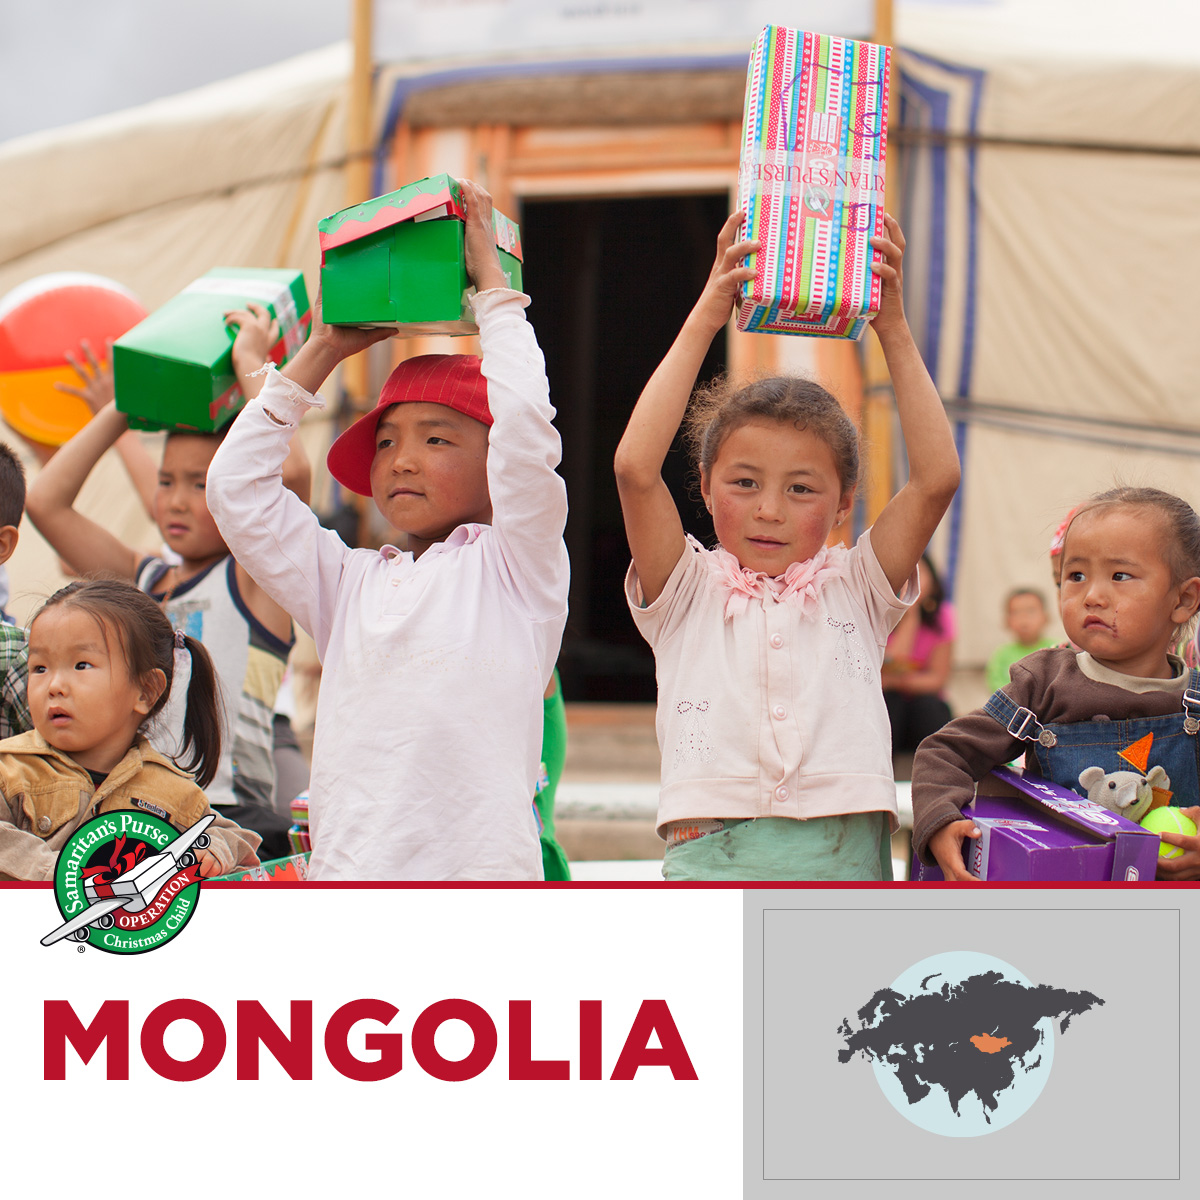 Shoebox gifts travel to 100+ countries every year, bringing Good News and great joy to children in need! In Mongolia, outreach events began in 1997; since then, nearly ONE MILLION children have received shoebox gifts. May the Lord continue to move mightily in this country! 🇲🇳